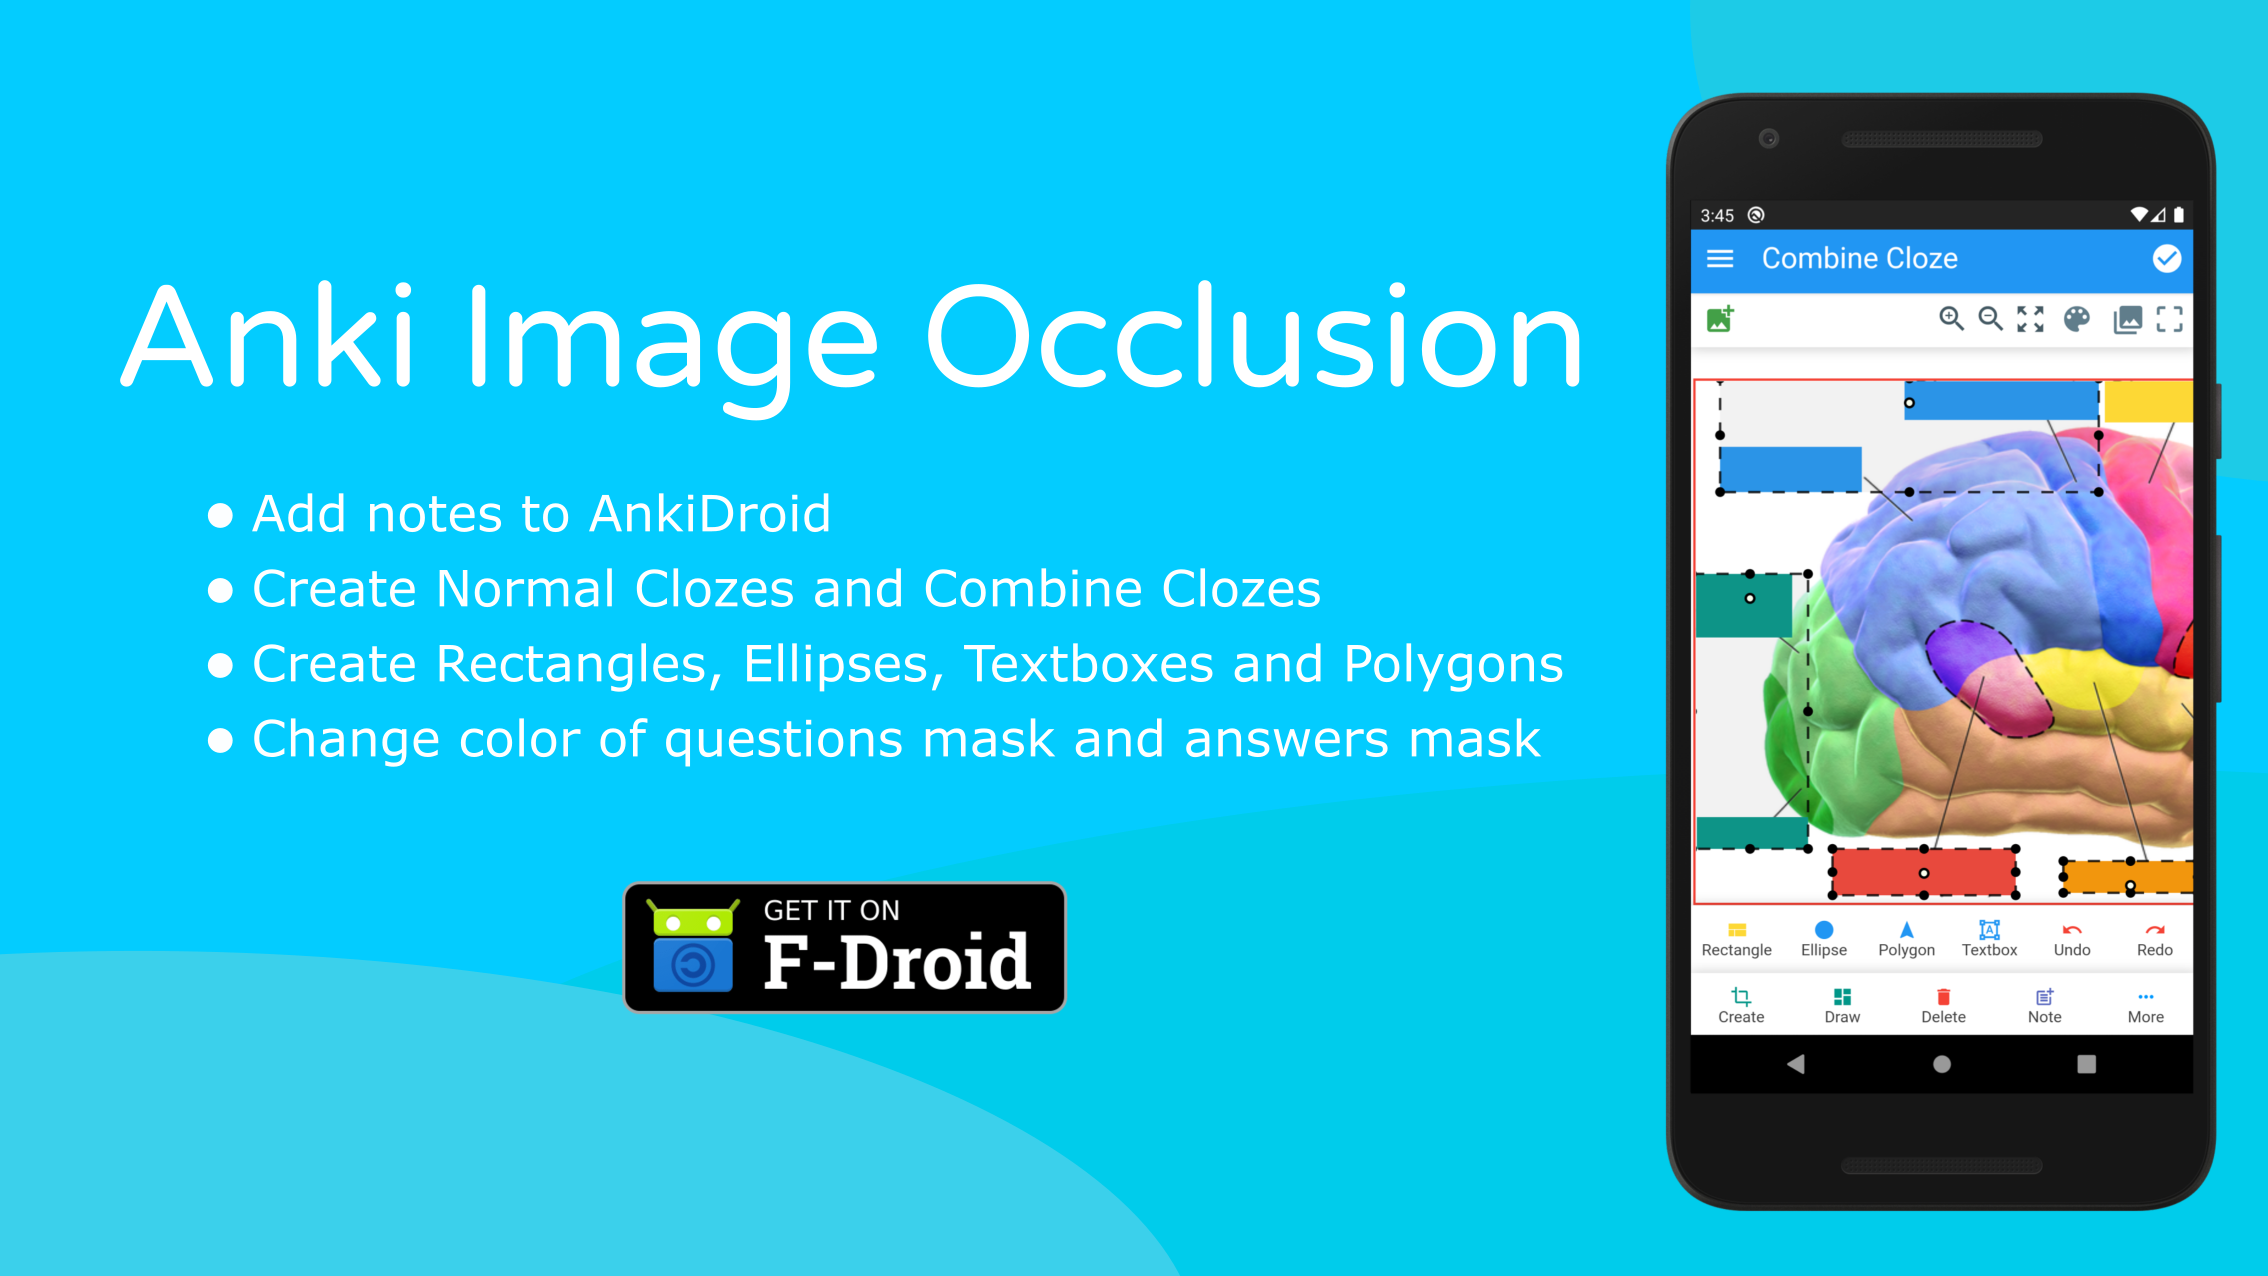 Download the app from F-Droid